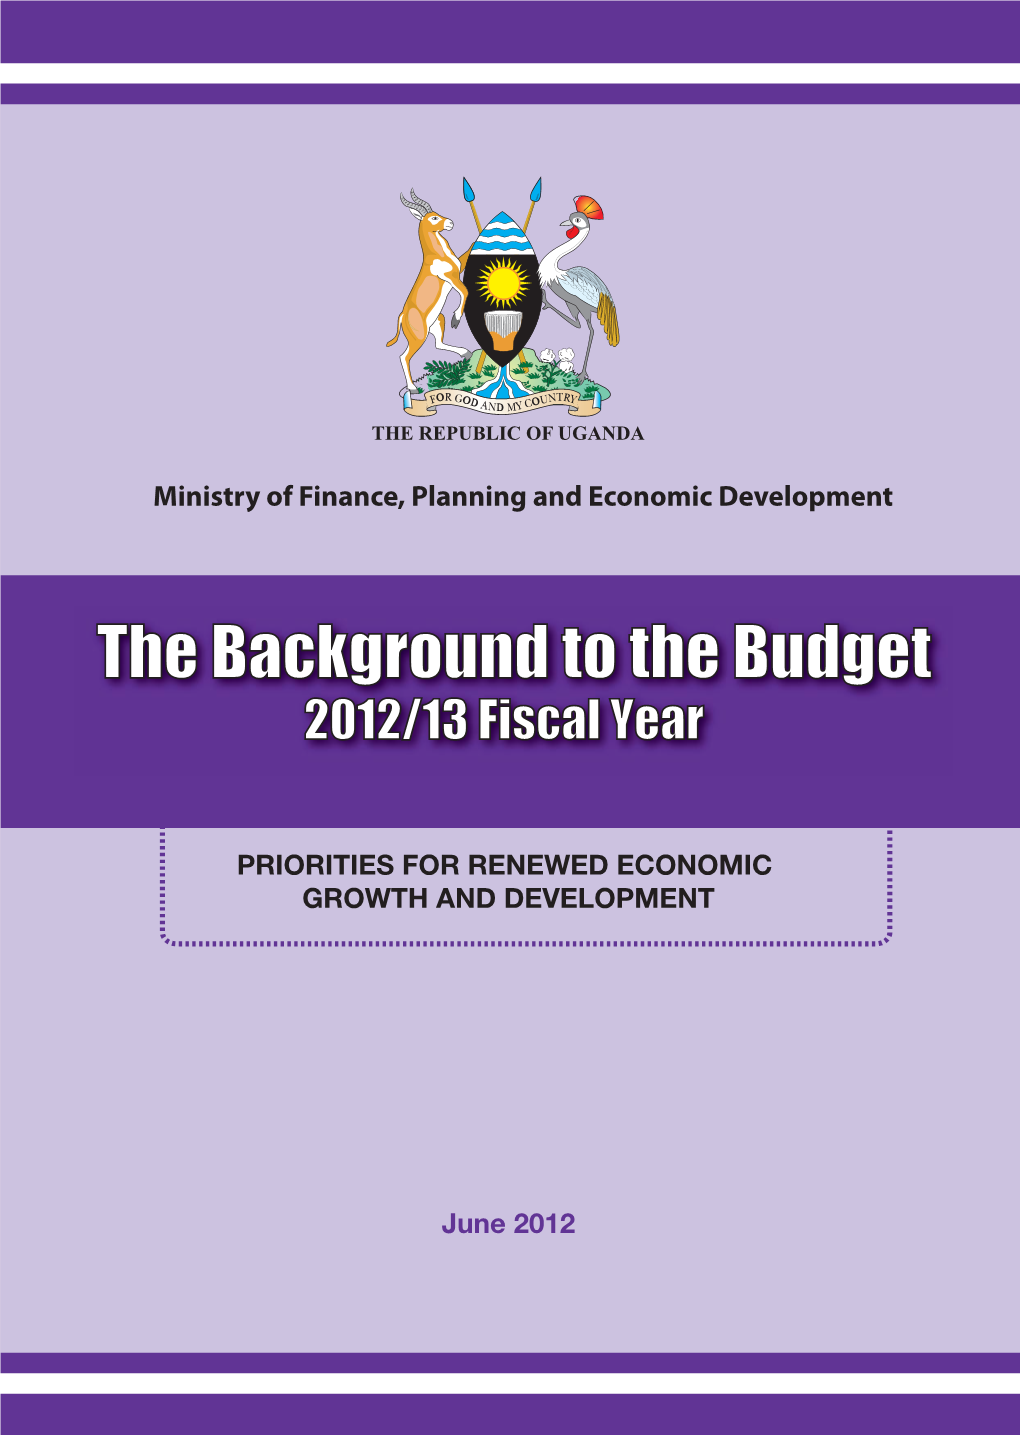 The Background to the Budget 2012/13 Fiscal Year